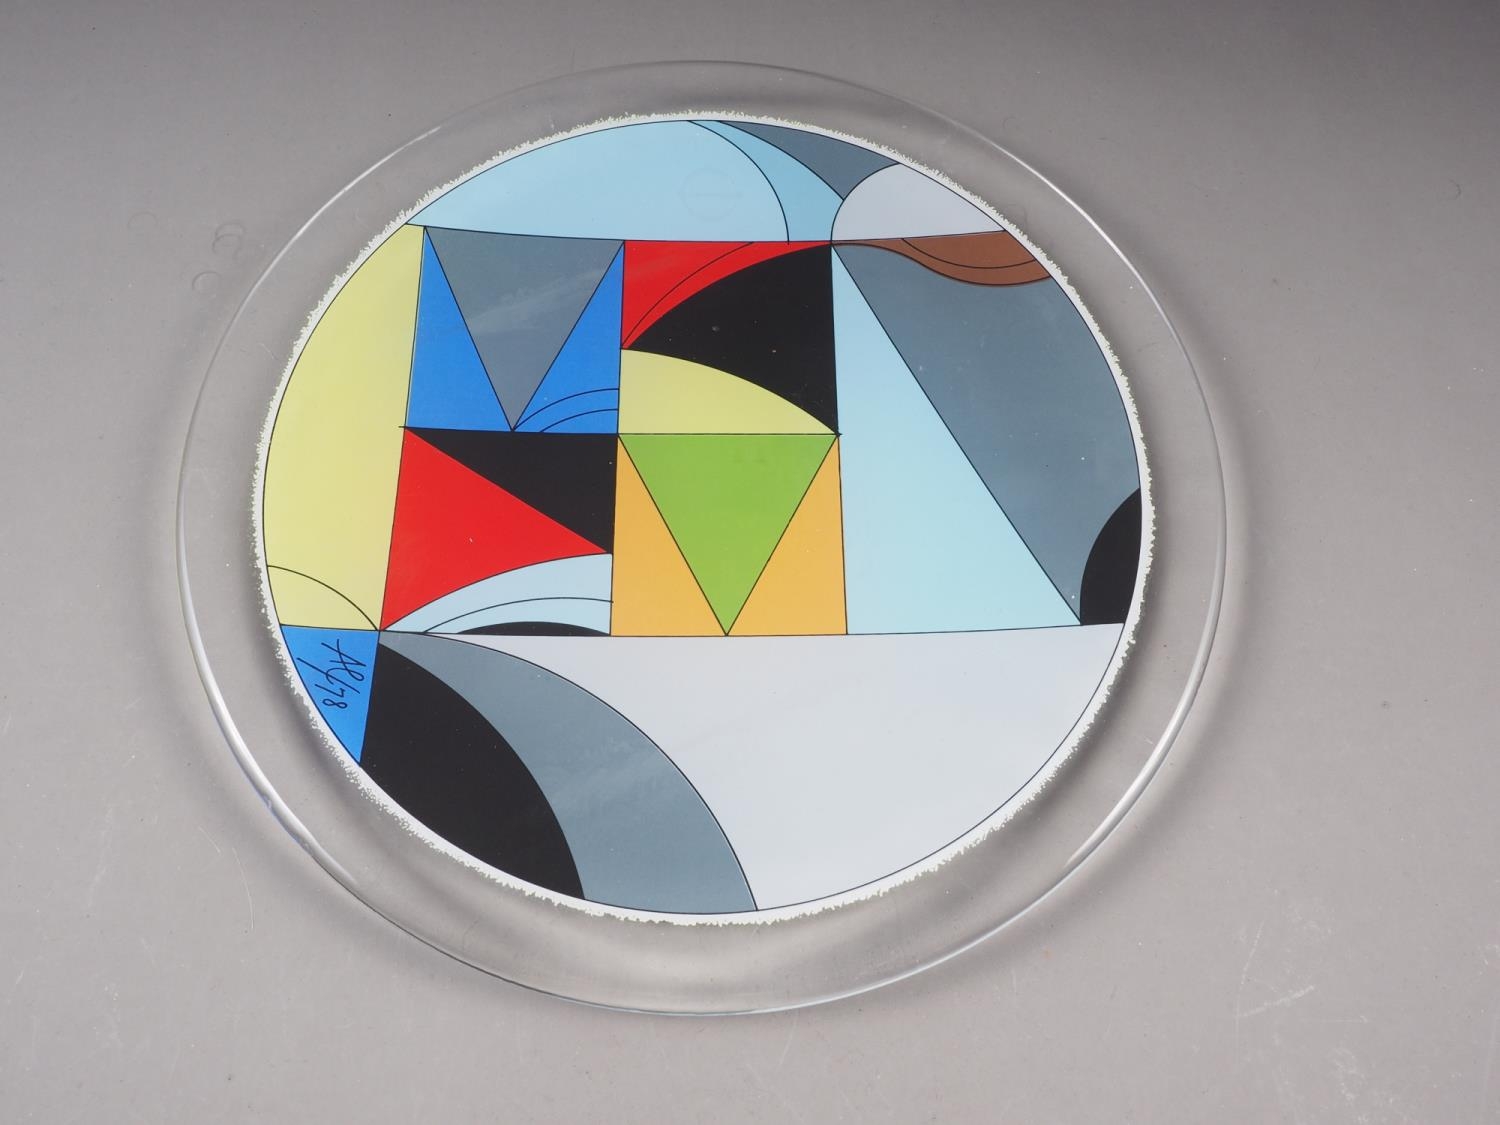 An Alfred Lutz Glas Galerie Wiesenthalhutte limited edition abstract design glass plate